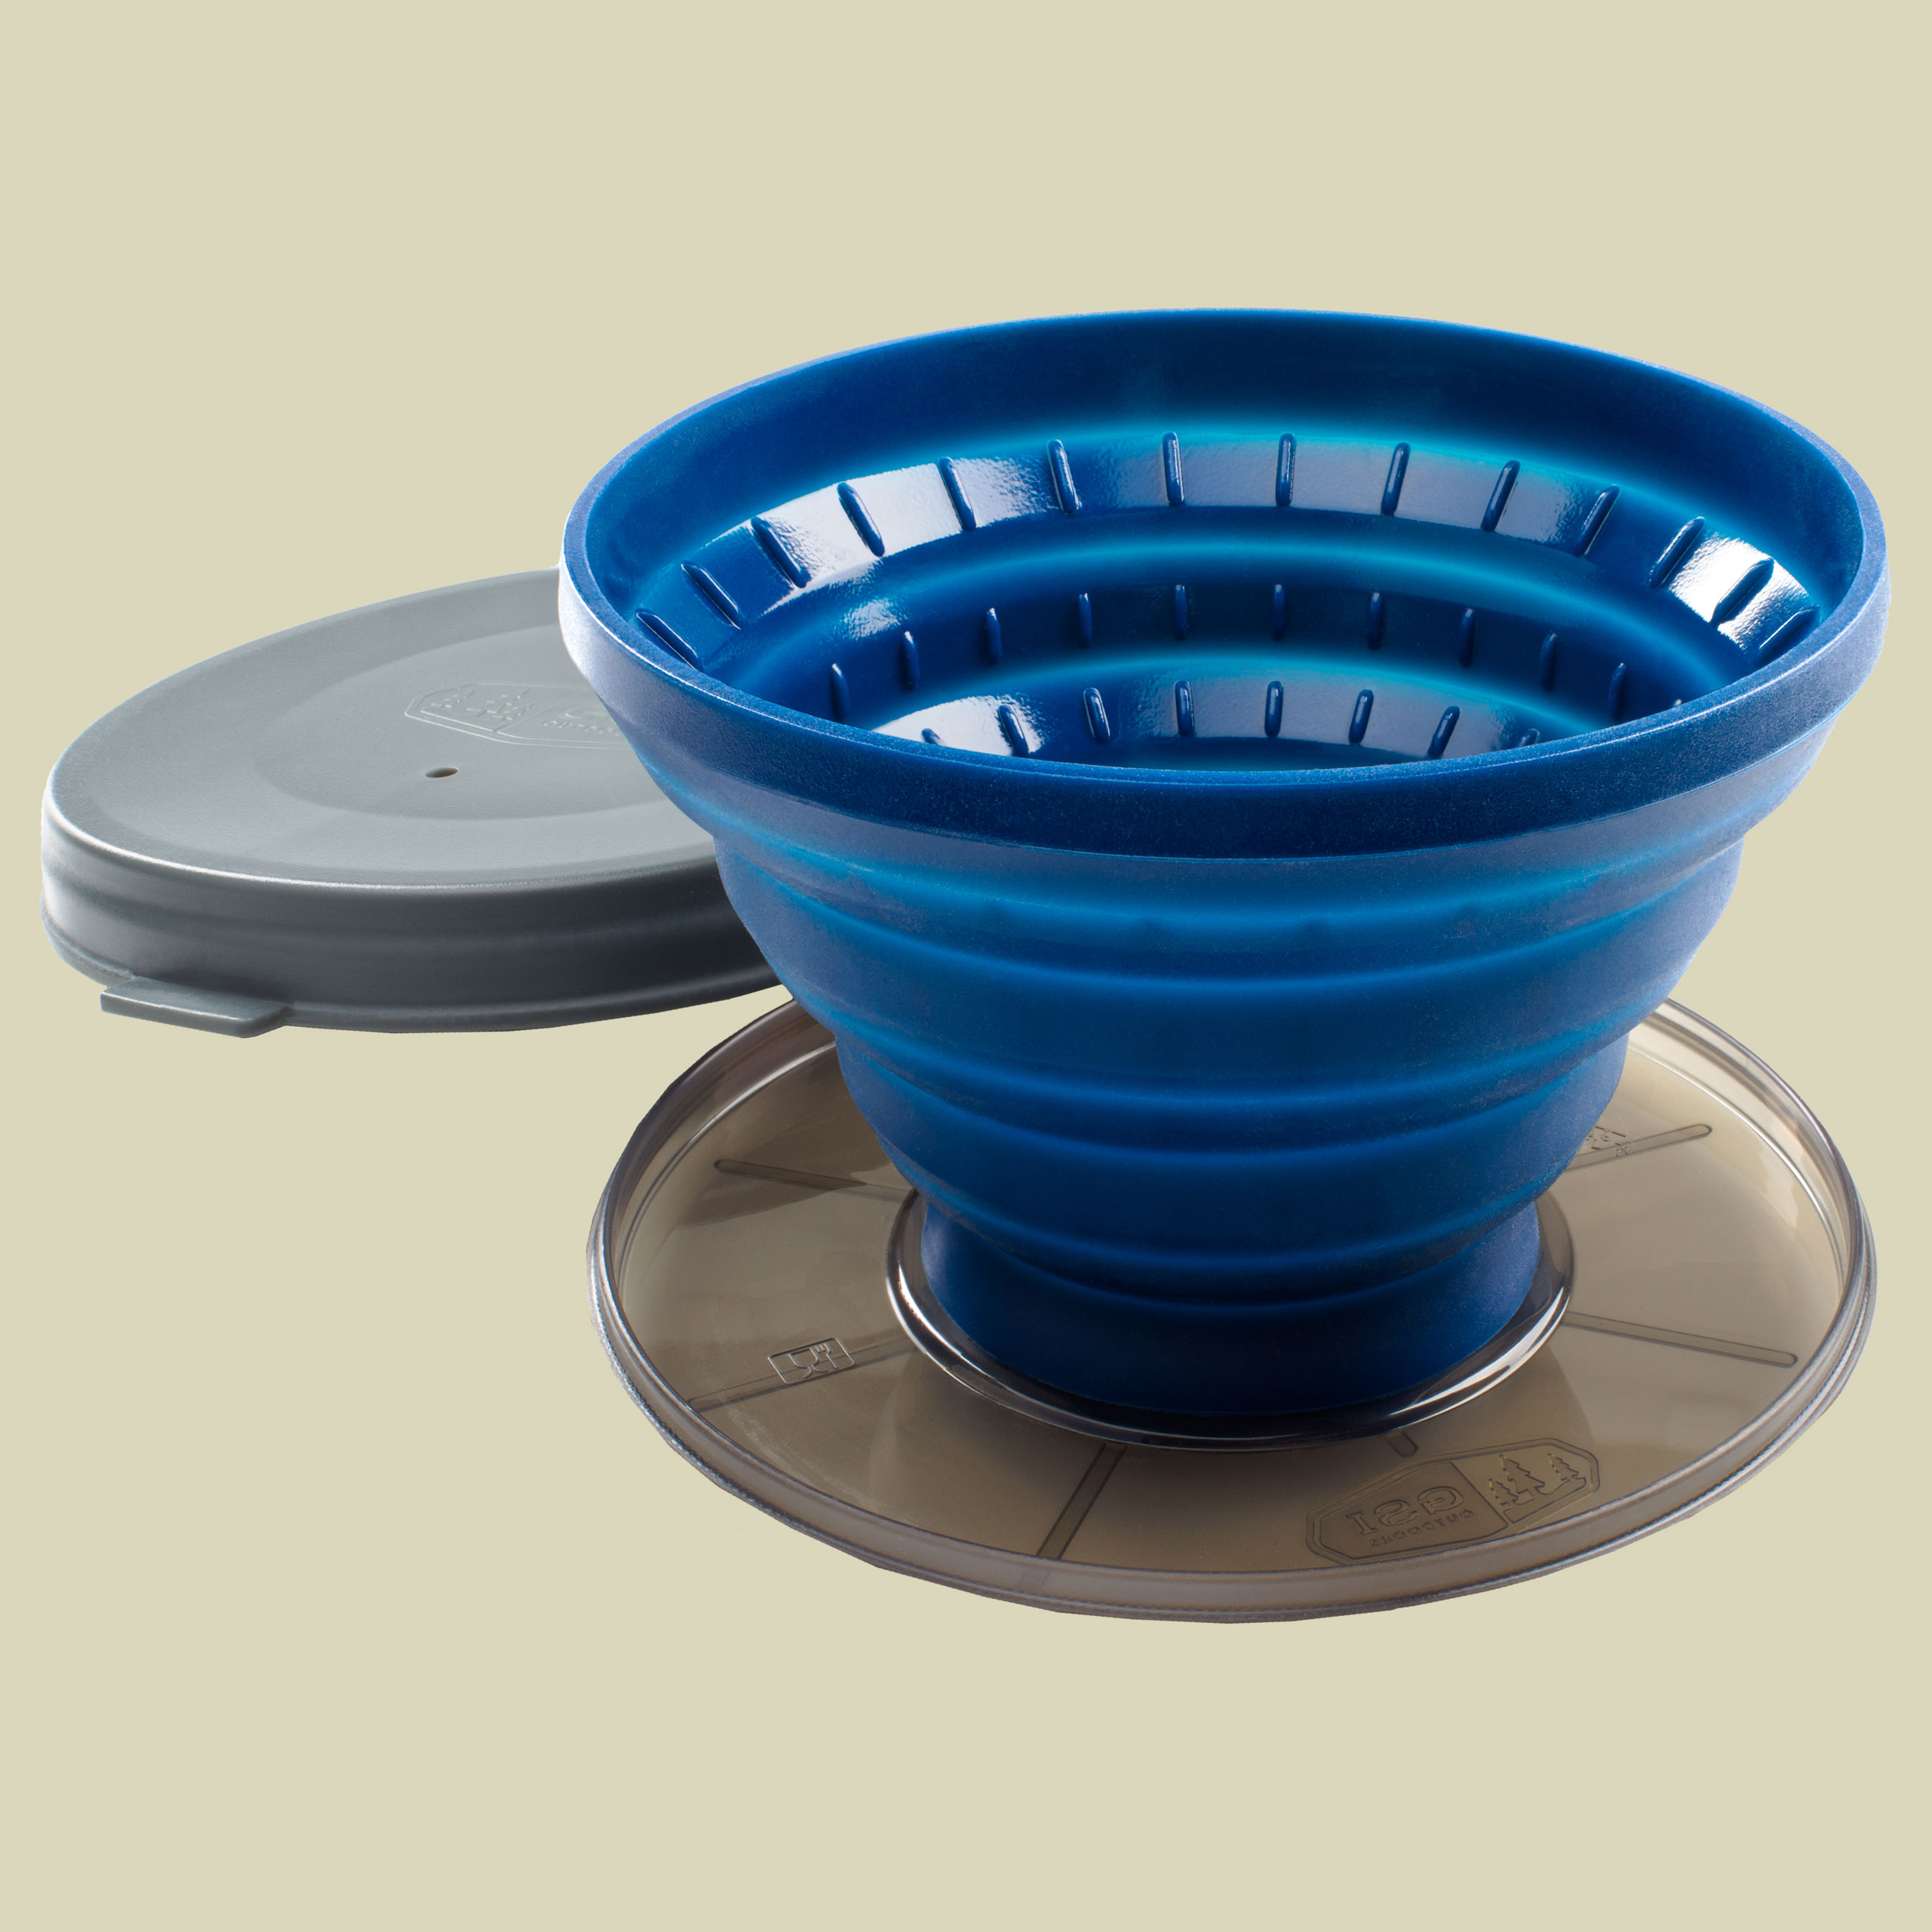 Collapsible Java Drip Farbe: blue